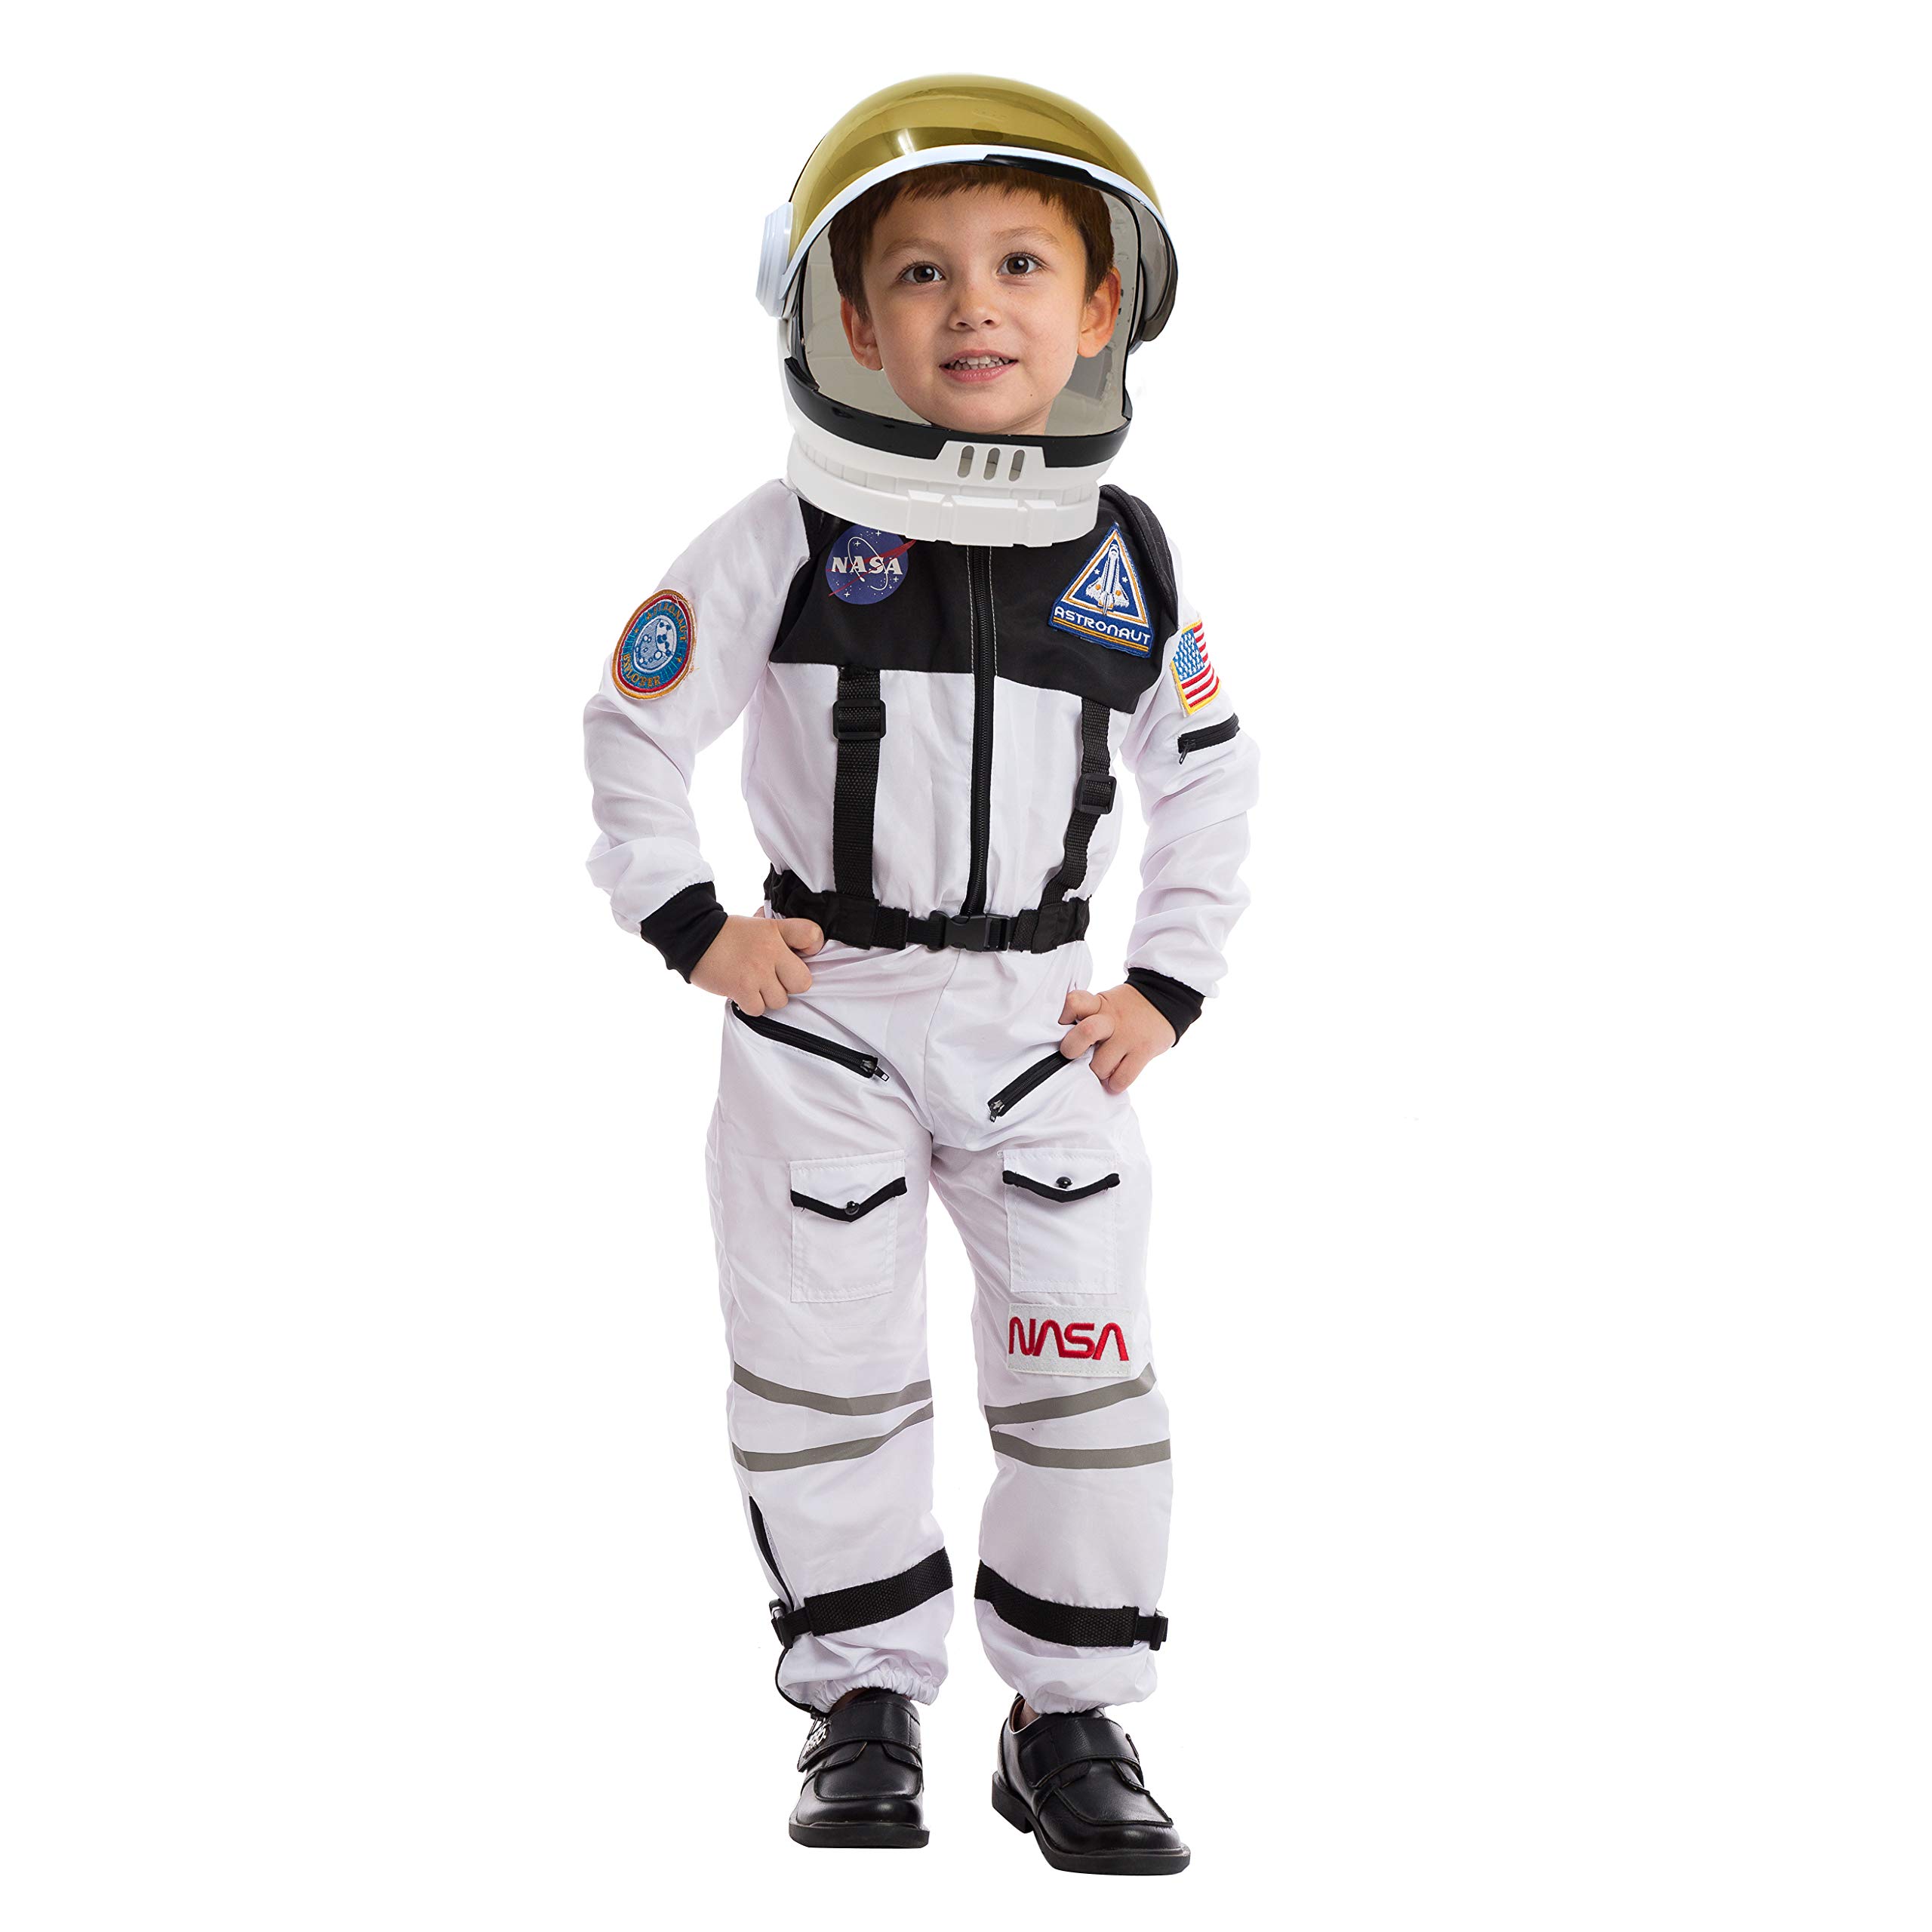 Spooktacular Creations Astronaut Costume with Helmet for Kids, Space Suit, Space Jumpsuit for Halloween Boys Girls Pretend Role Play Dress Up (White)-S